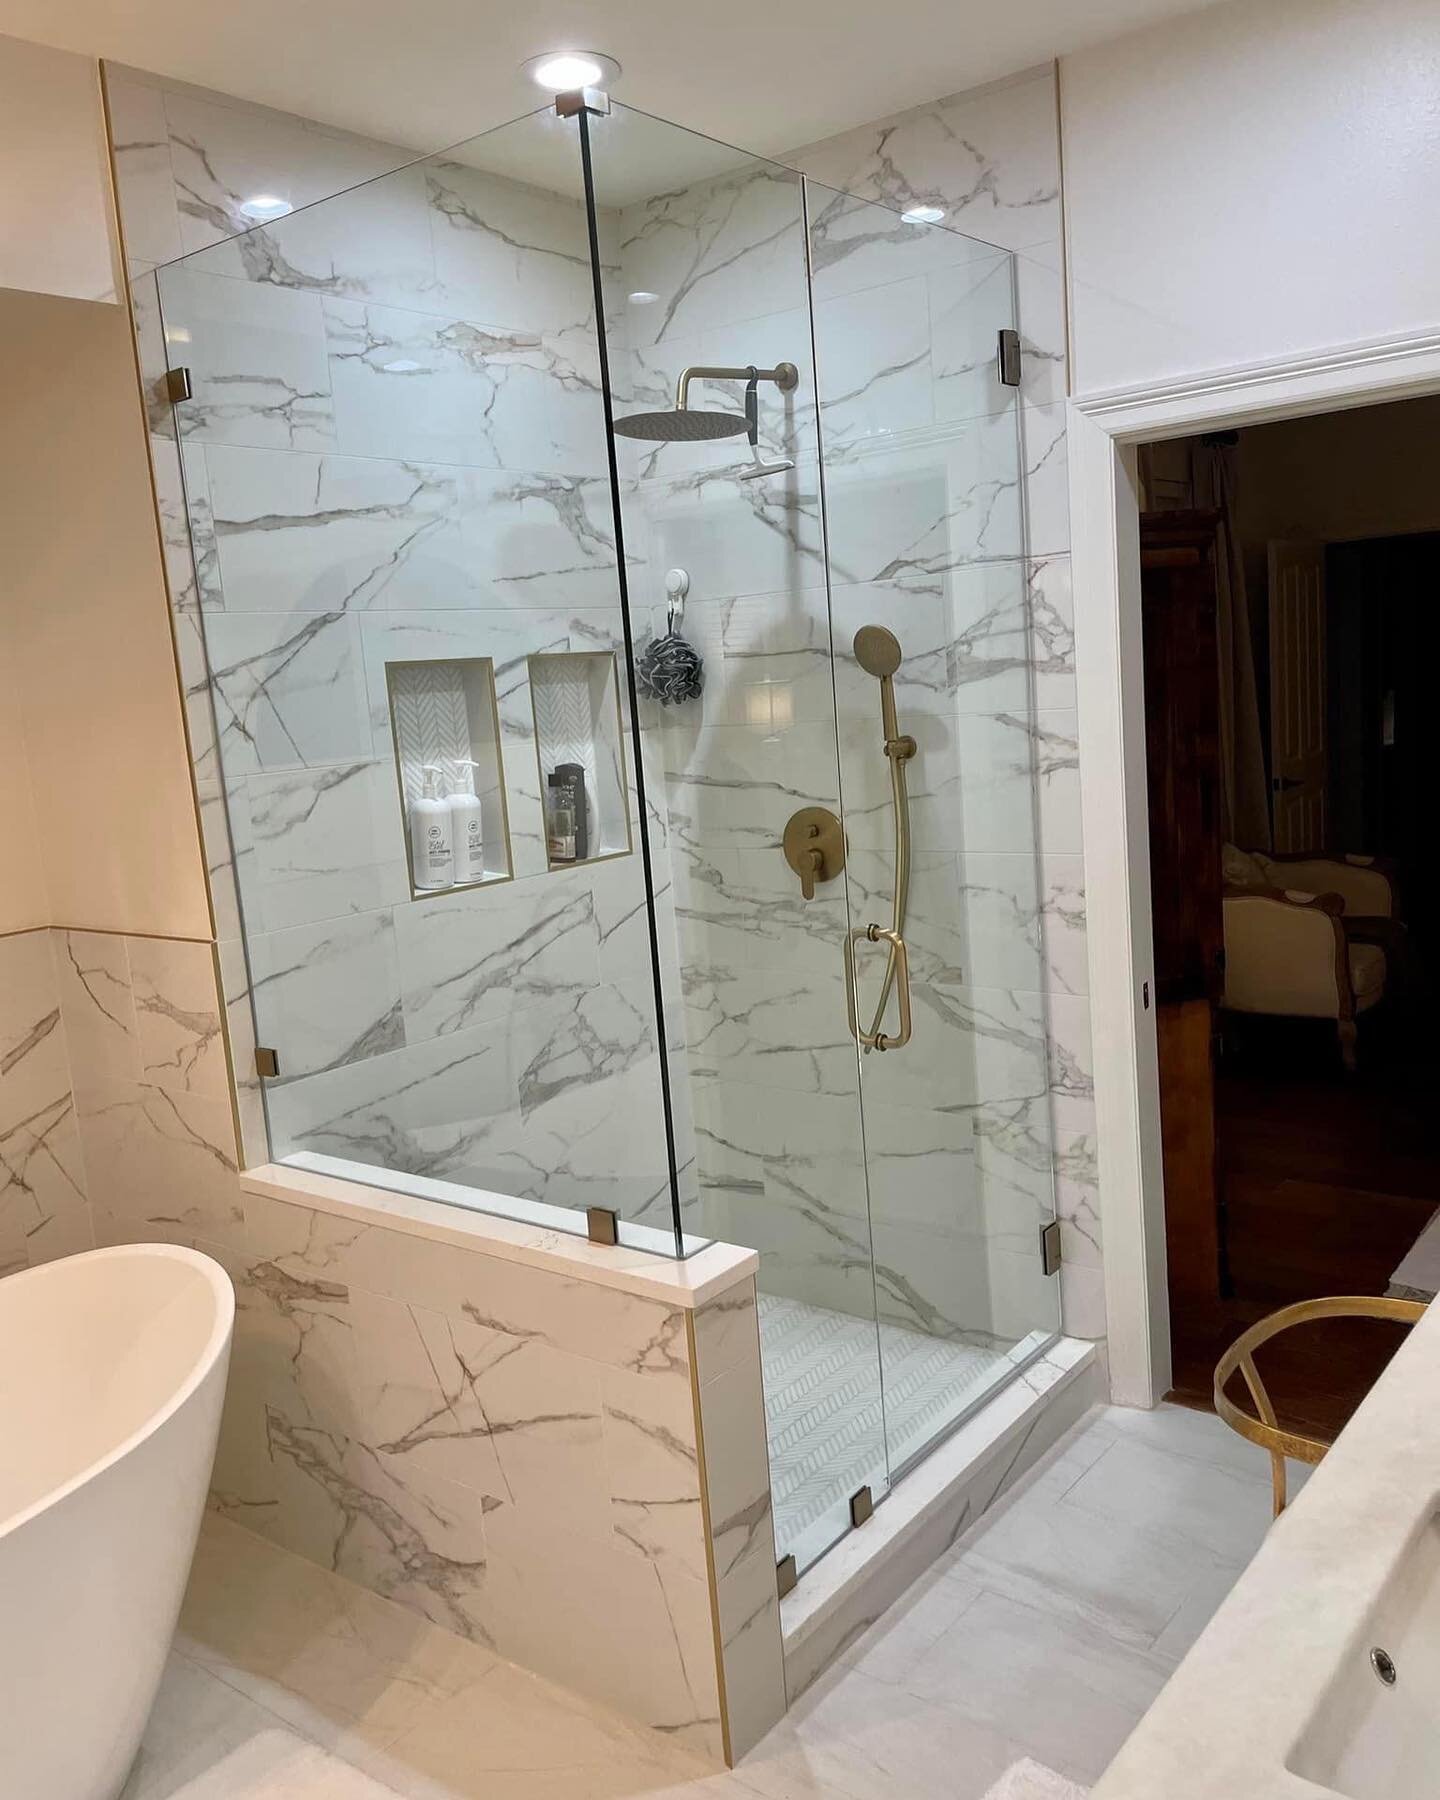 Before and After from one of our latest projects! 
Give us a call for a free estimate on your bathroom remodel! 🔨 
2258100612 

#batonrougeremodeling #batonrougecontractors #bathroomremodel #construction